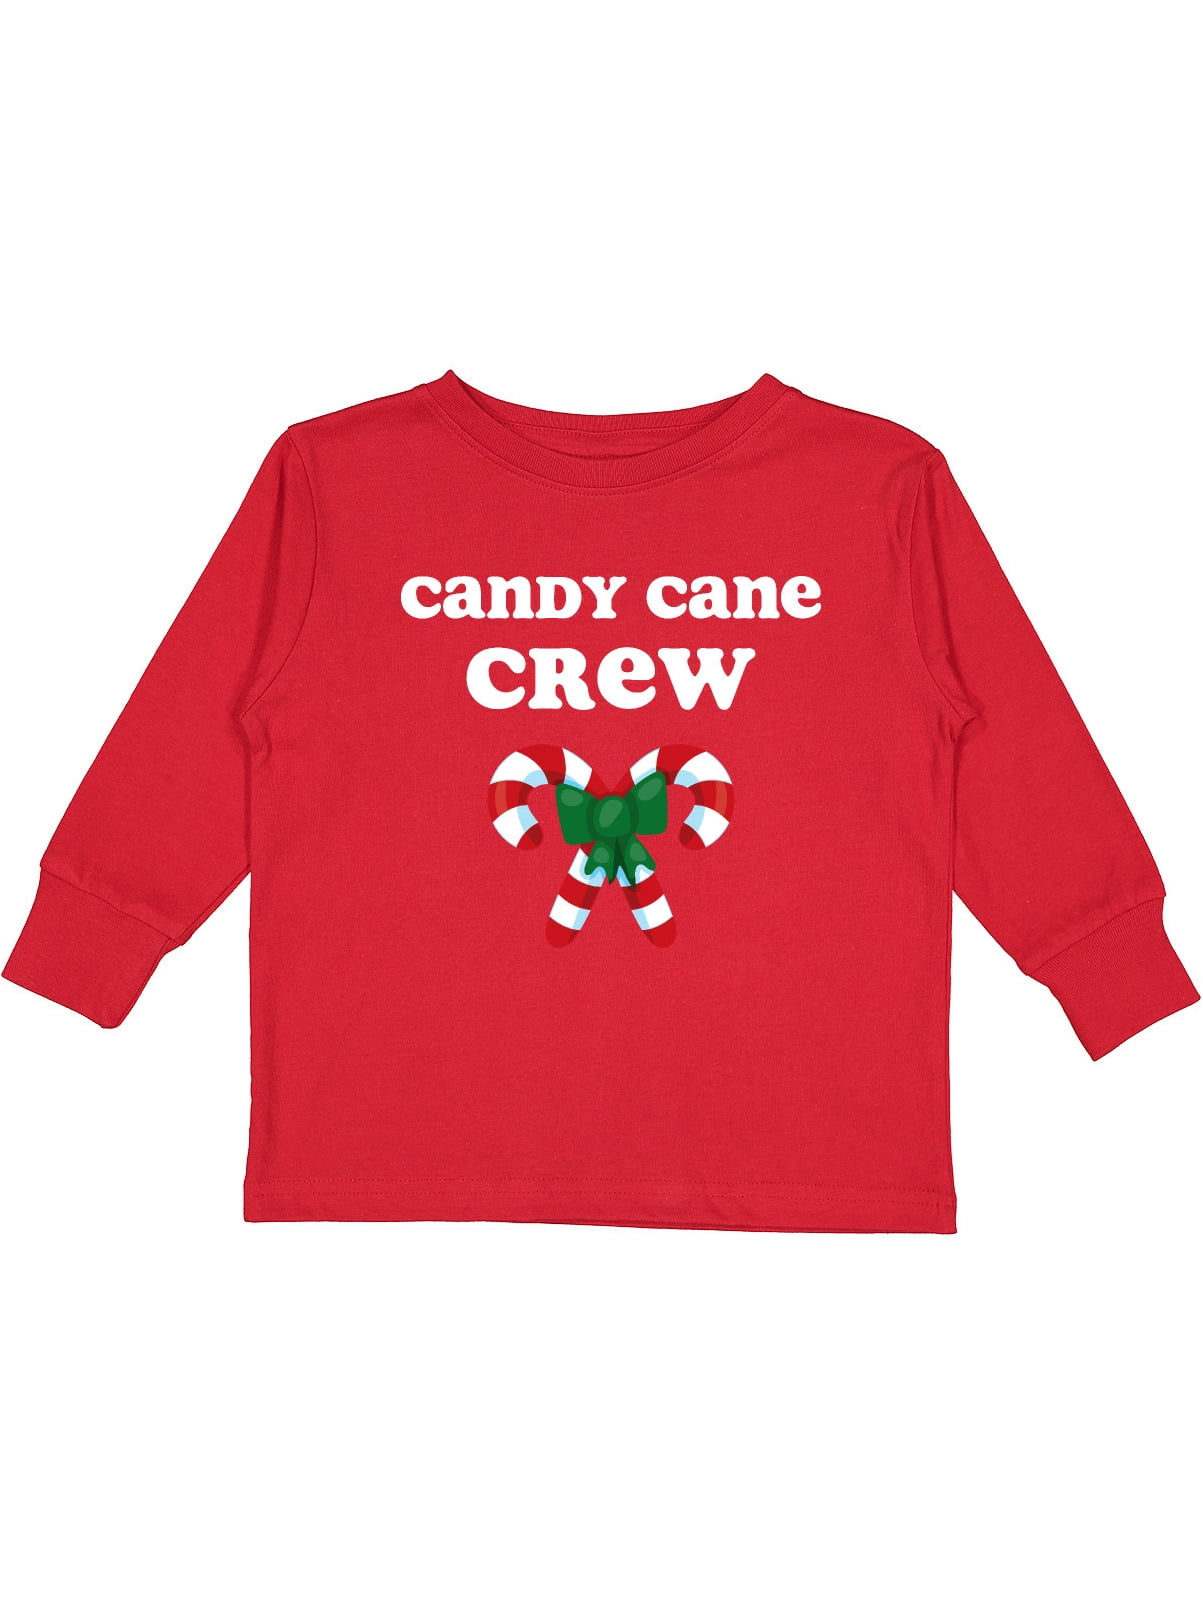 NEW Gymboree Reindeer Candy Cane Tee Top Shirt NWT North Pole Party Boys  6-12 M